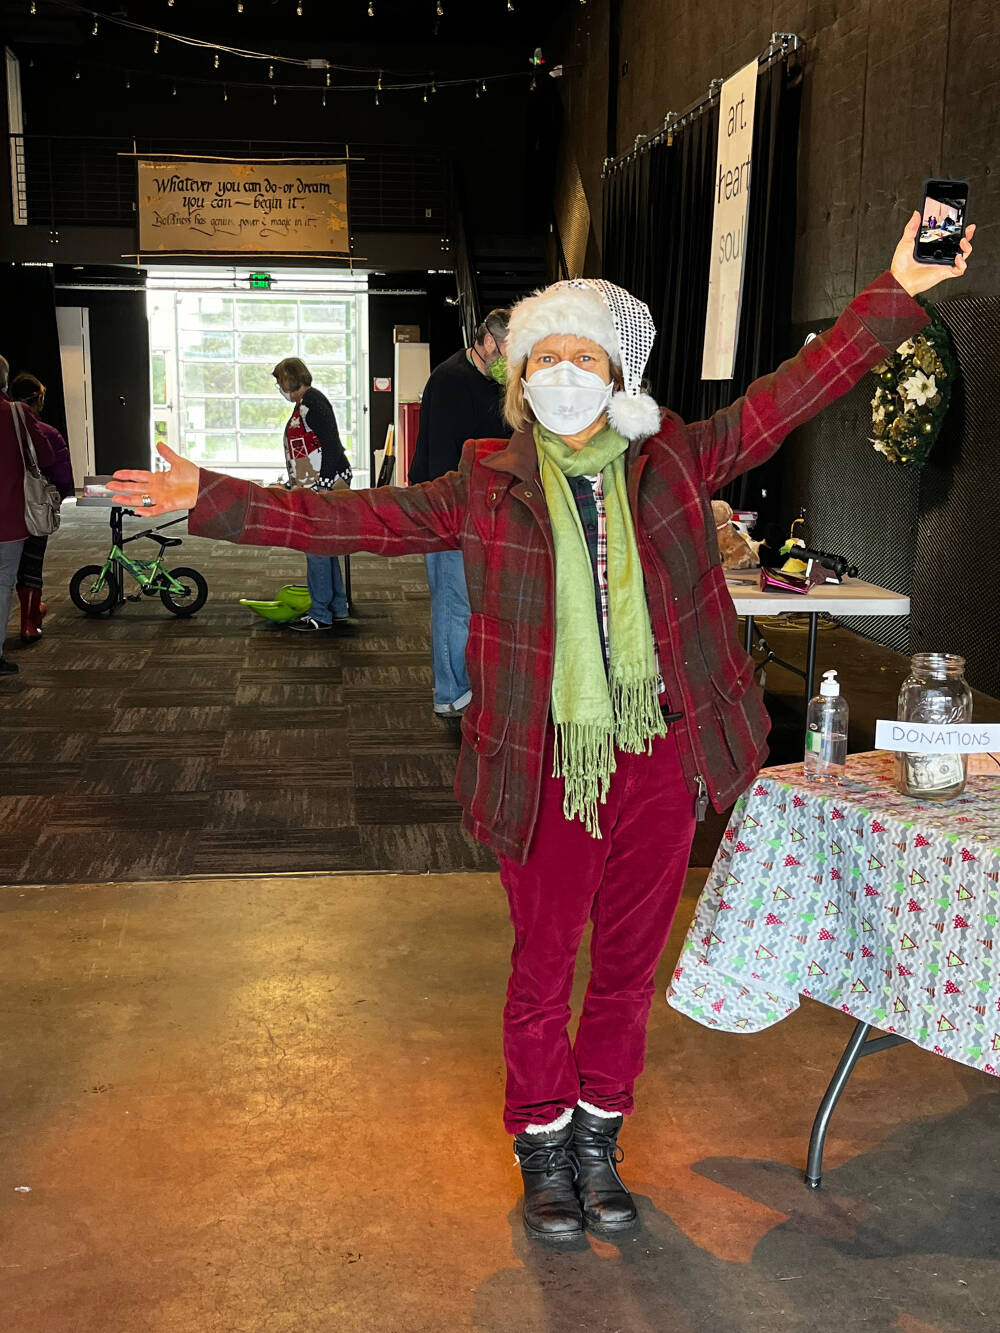 Open Space co-founder Janet McAlpin, preparing for last year’s Toy Swap (Courtesy Photo).